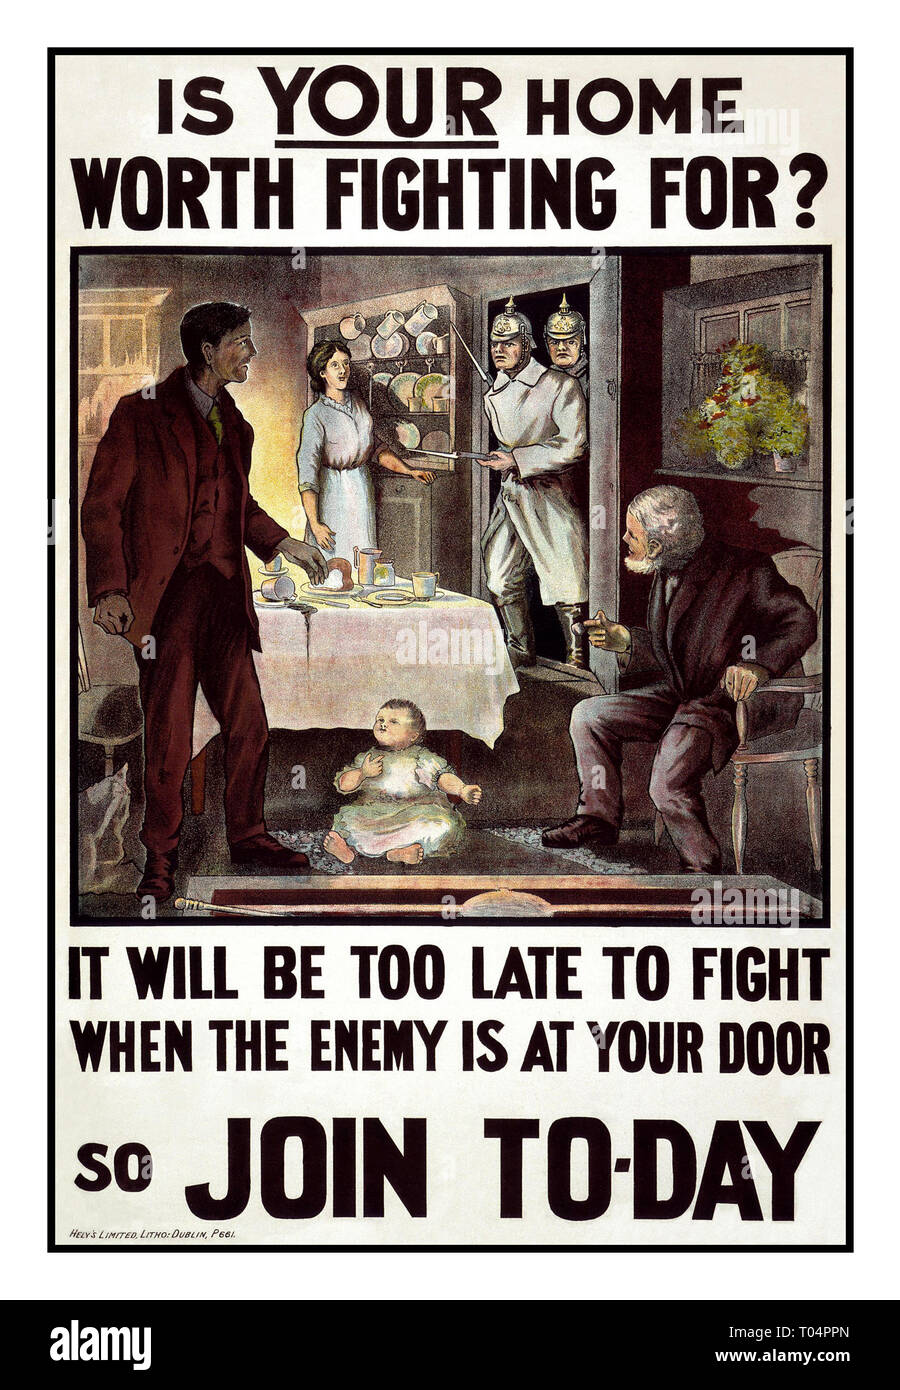 WWI 1900's PROPAGANDA RECRUITMENT POSTER FROM THE FIRST WORLD WAR illustrating spiked helmets of invading German soldiers forcing into a Southern Ireland home setting 'is YOUR home worth fighting for ?'  ' It will be too late to fight when the enemy is at your door so JOIN TODAY'  World War 1 Poster Stock Photo